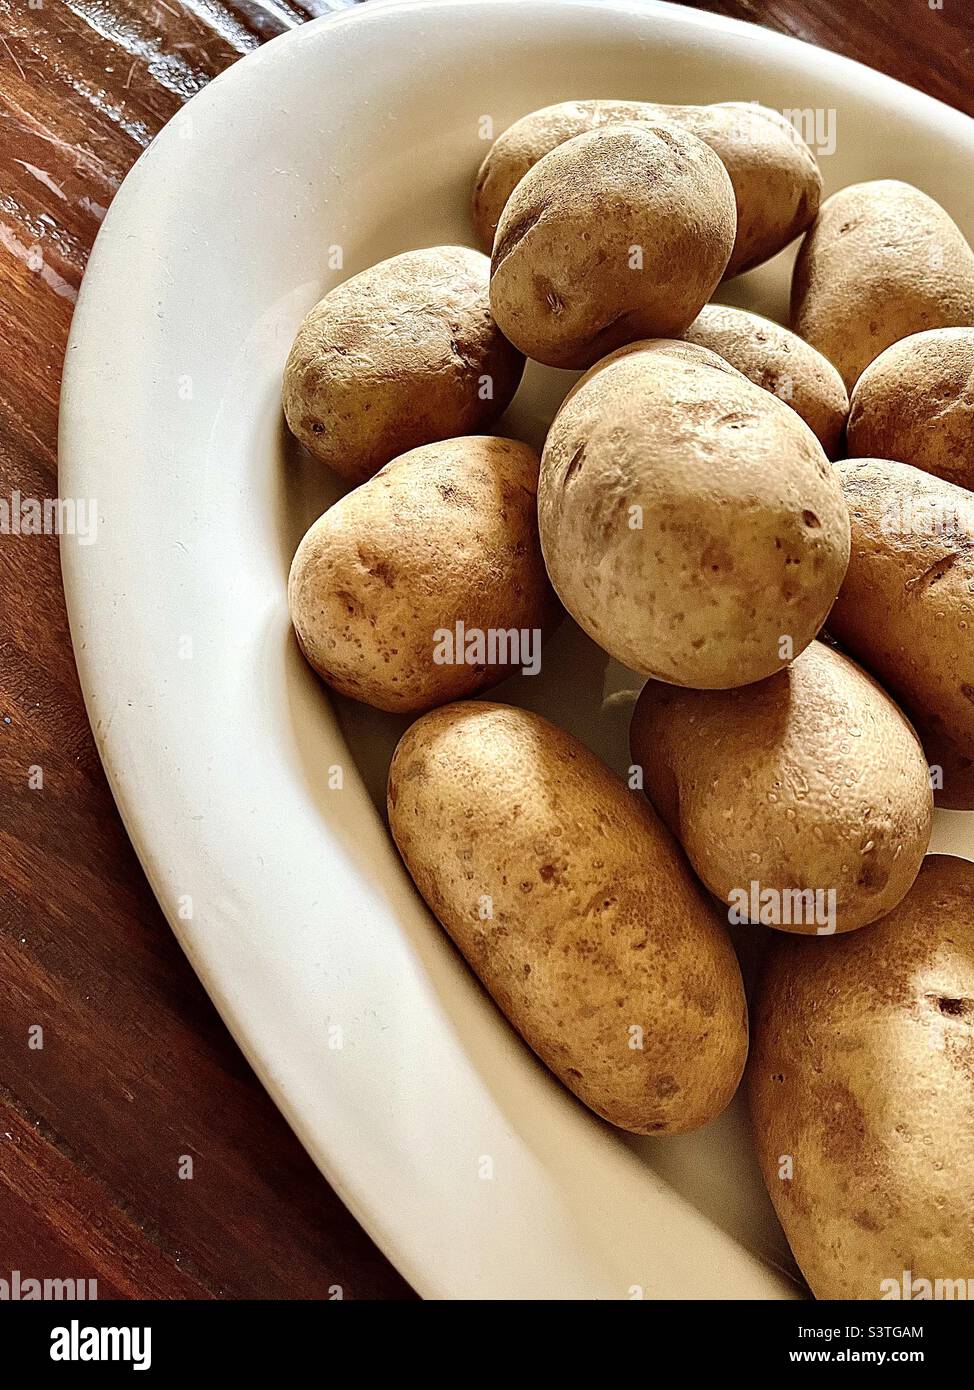 Big white plate of fresh, clean, potatoes on wooden table Stock Photo